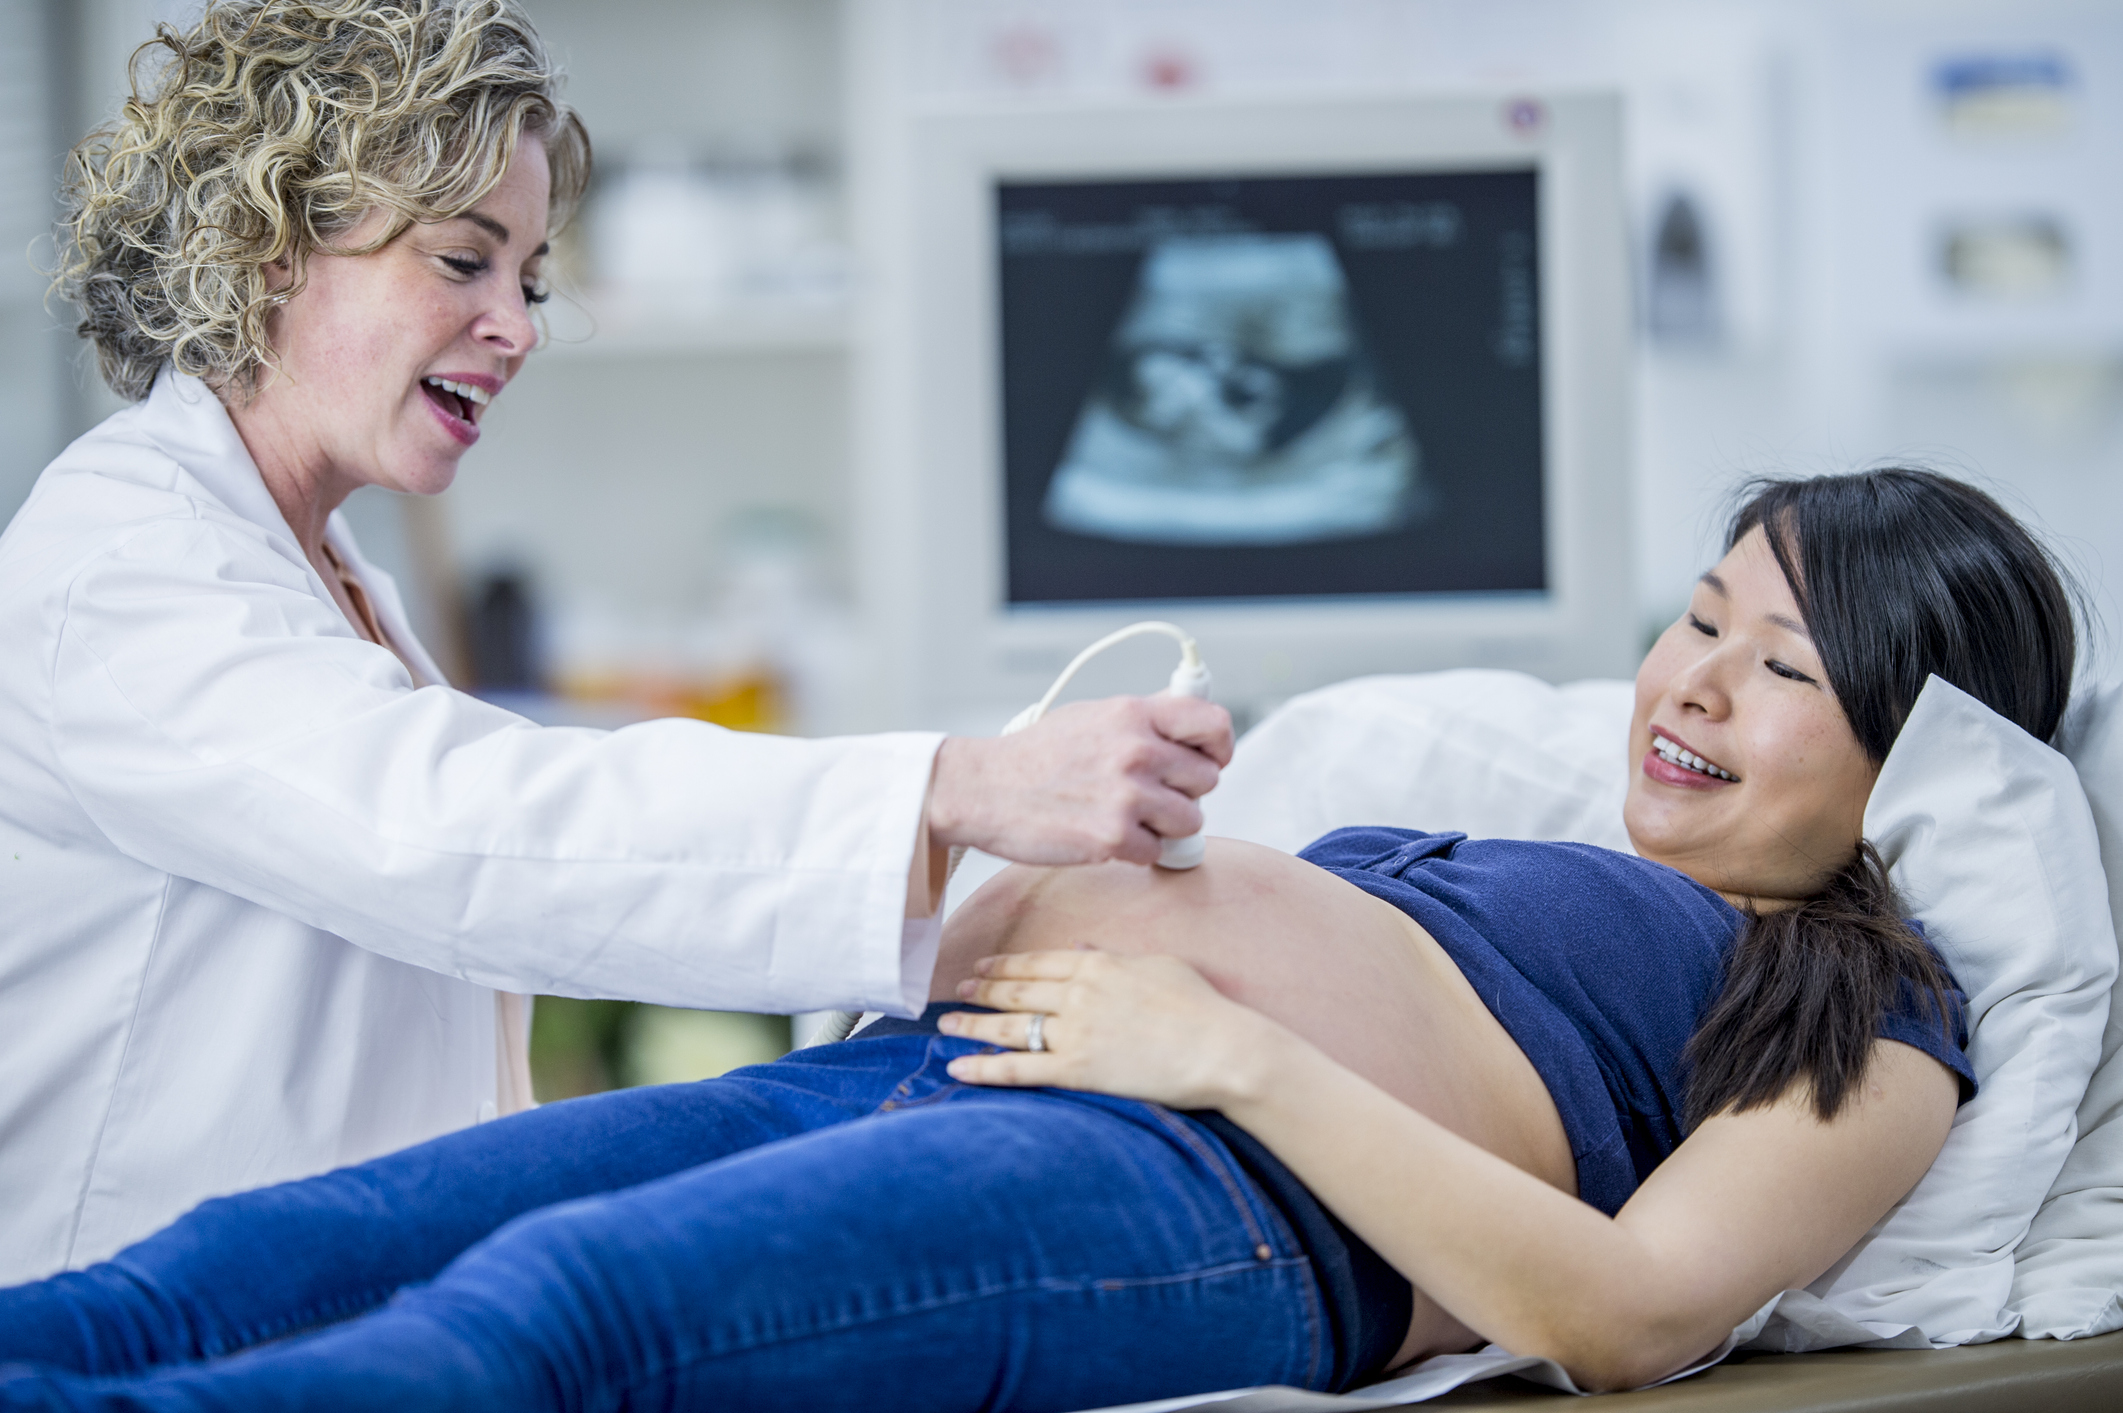 New Moms, Here’s What You Can Do To Prepare For Your First Ultrasound Session